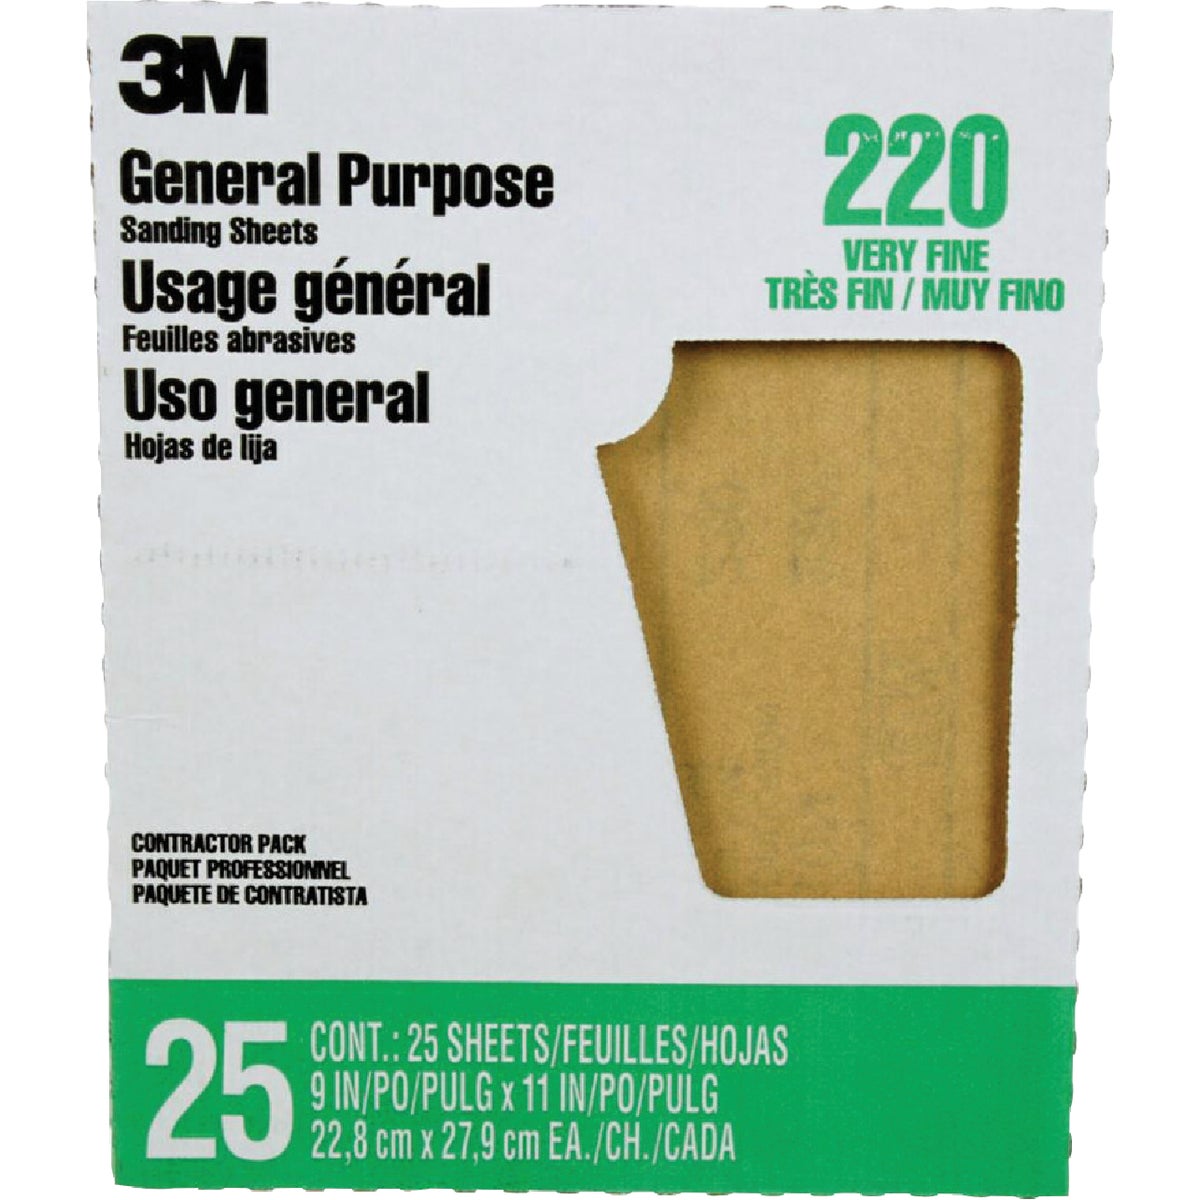 Item 335417, 3M Pro Pak Aluminum Oxide Sandpaper are the abrasives are the choice of 